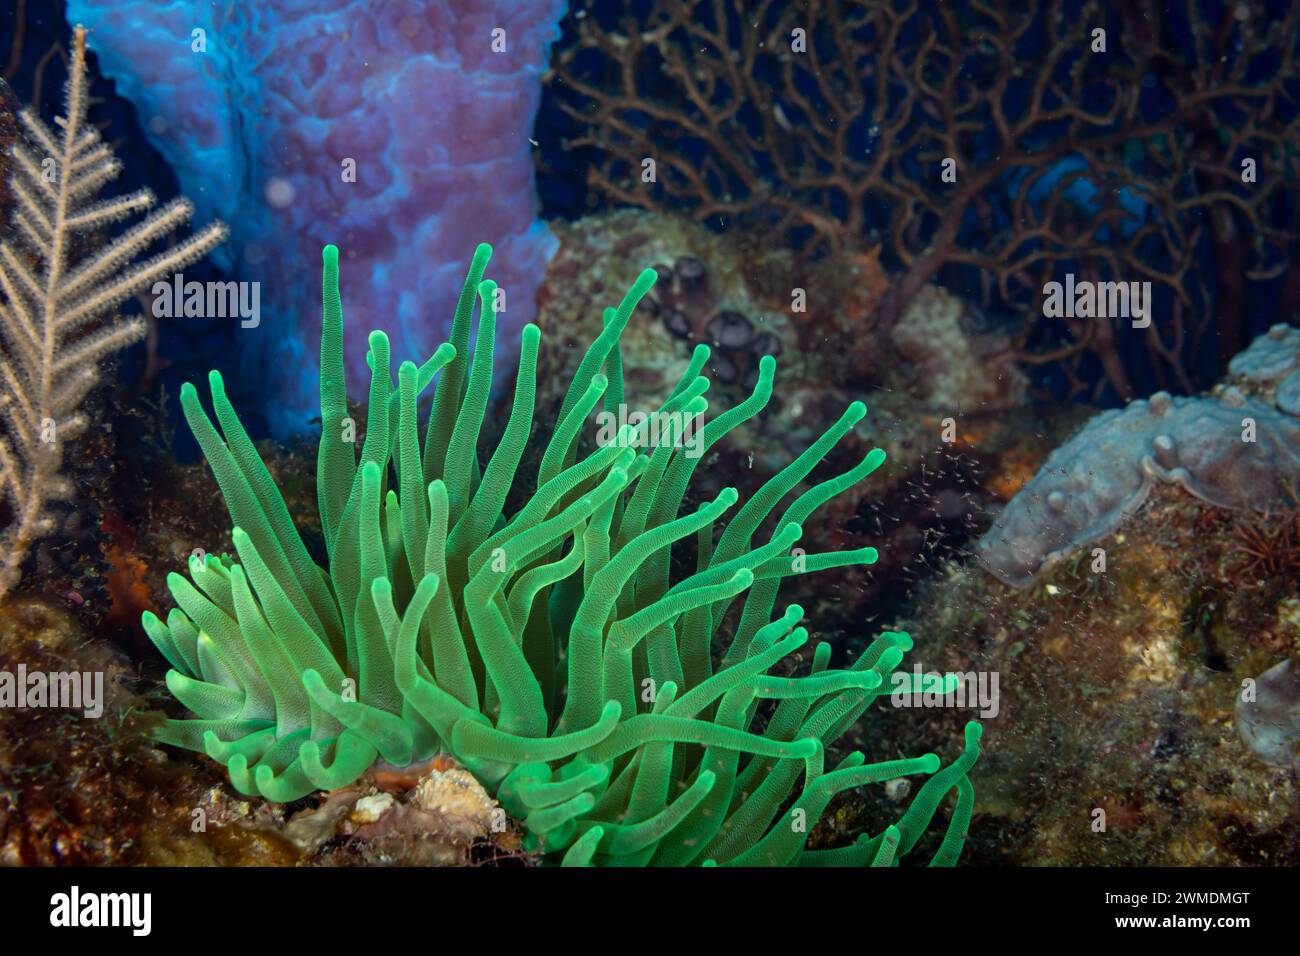 Beautiful and colorful green Sea Anemone, actiniaria, with long tentacles on coral reef Stock Photo